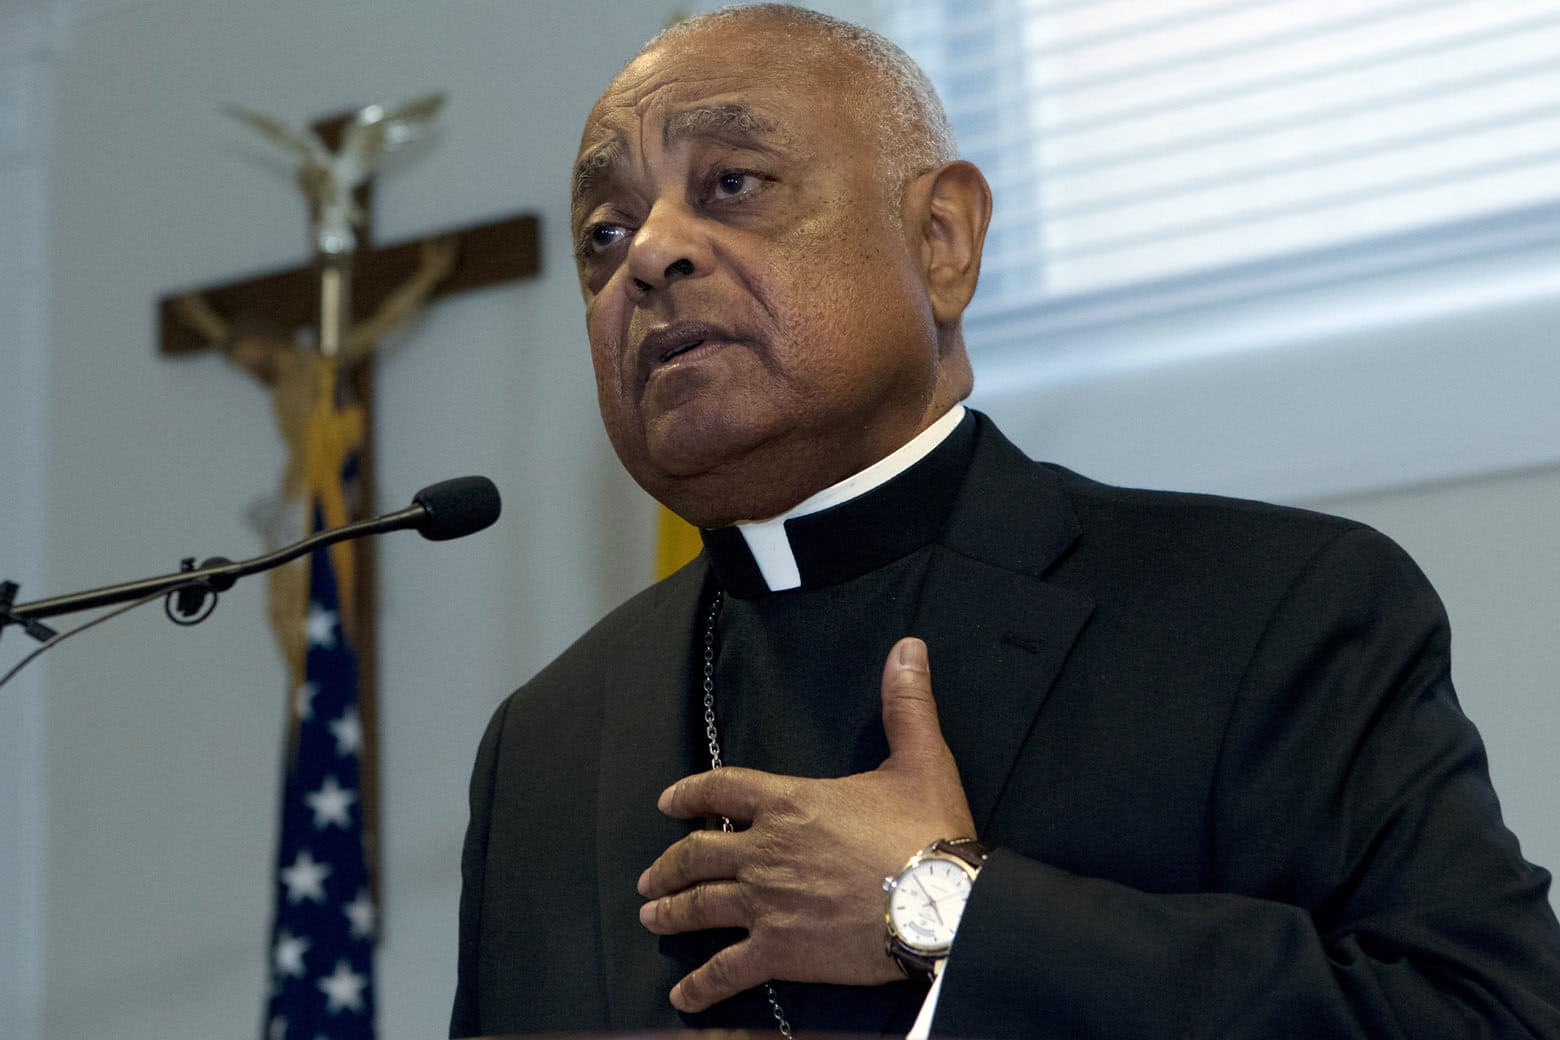 Archbishop designated by Pope Francis to the Archdiocese of Washington, Archbishop Wilton D. Gregory, speaks during a news conference at Washington Archdiocesan Pastoral Center in Hyattsville, Md., Thursday, April 4, 2019. Archbishop-designate Gregory will succeed Cardinal Donald Wuerl. (AP Photo/Jose Luis Magana)